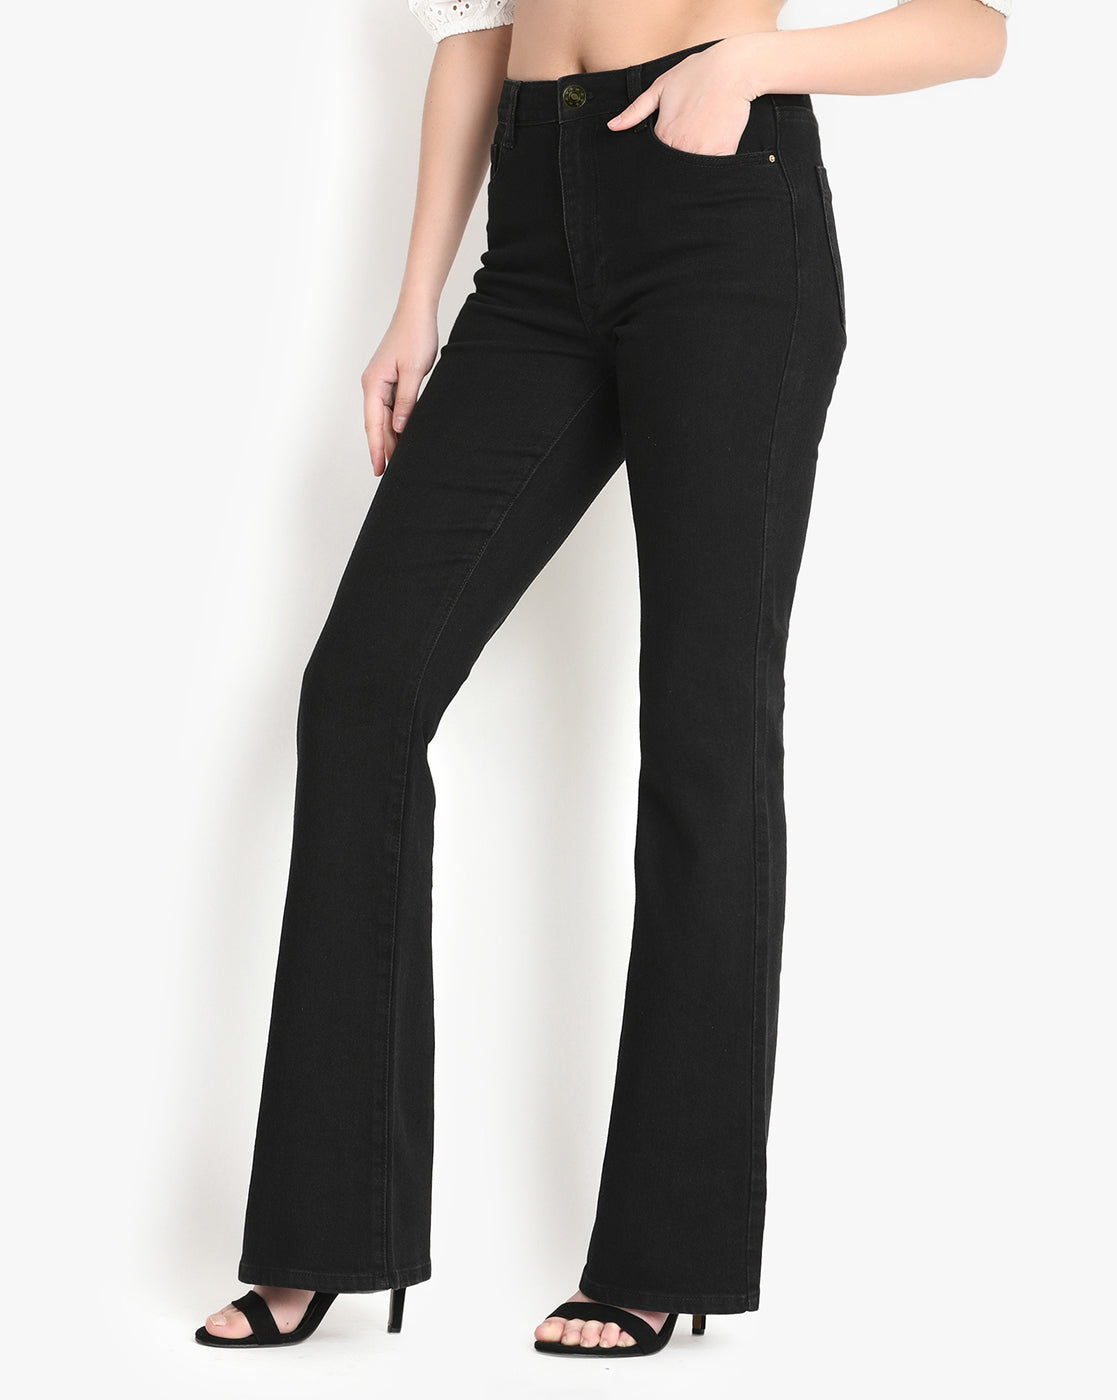 Obsidian Flare Jeans